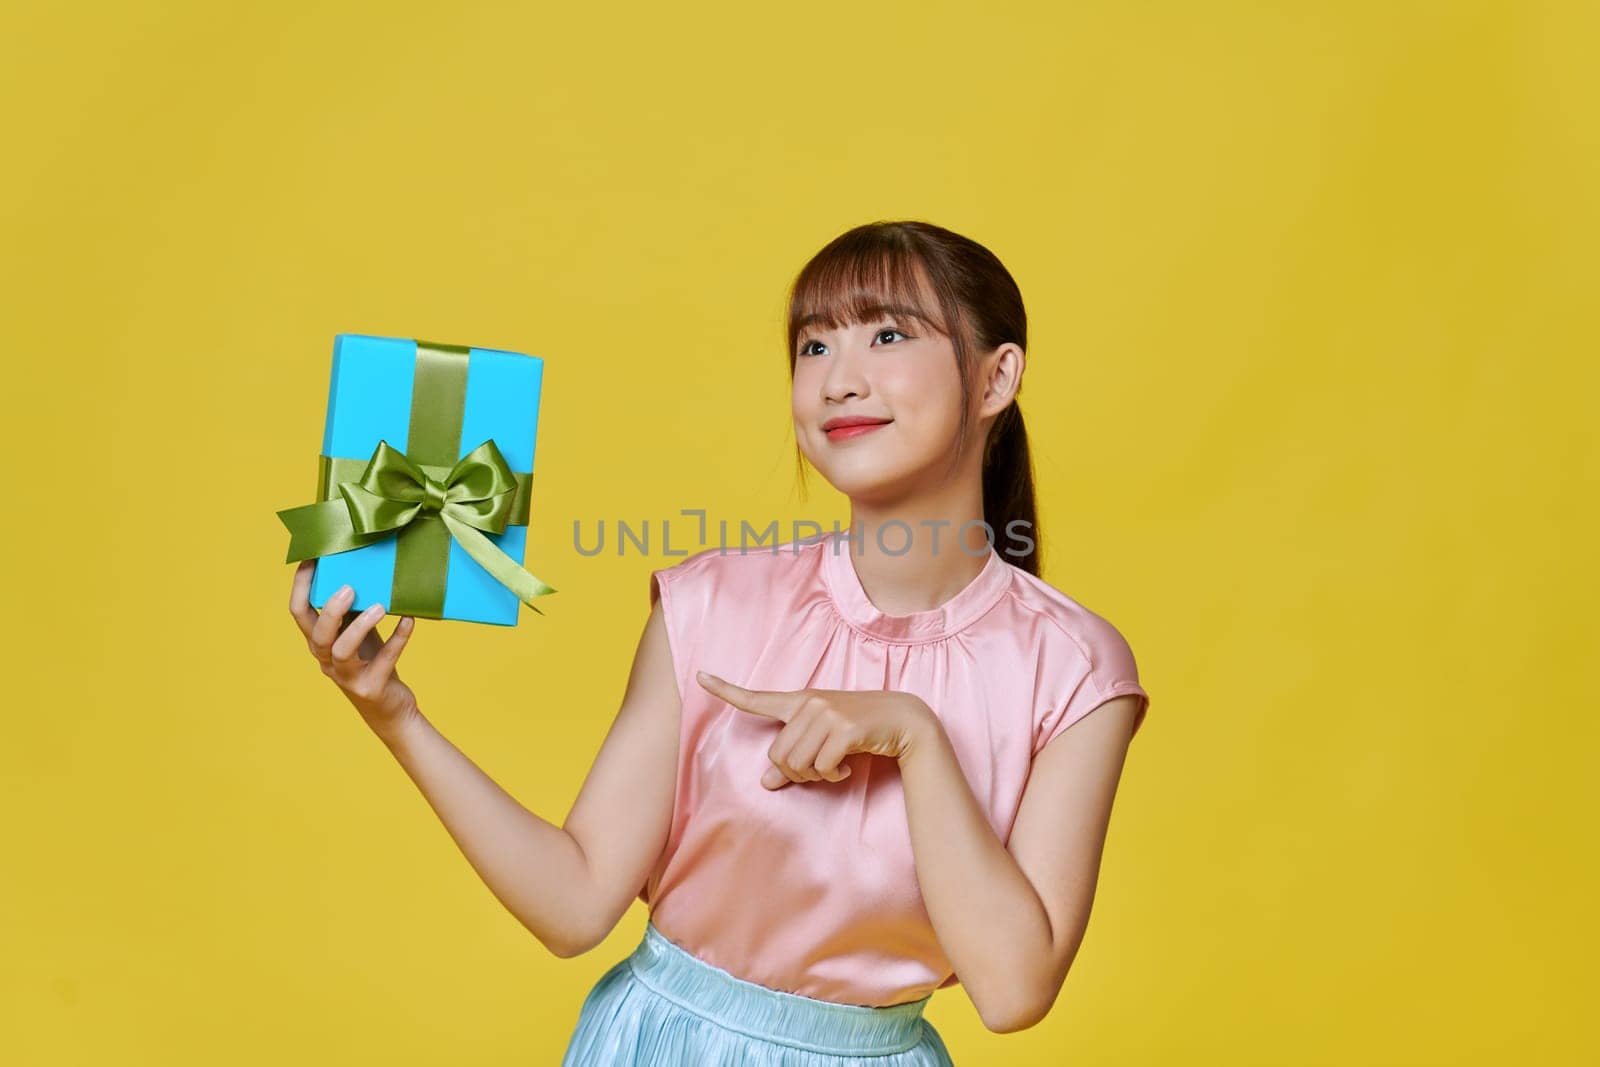 Beautiful girl posing with gift and smiling, showing wrapped present box